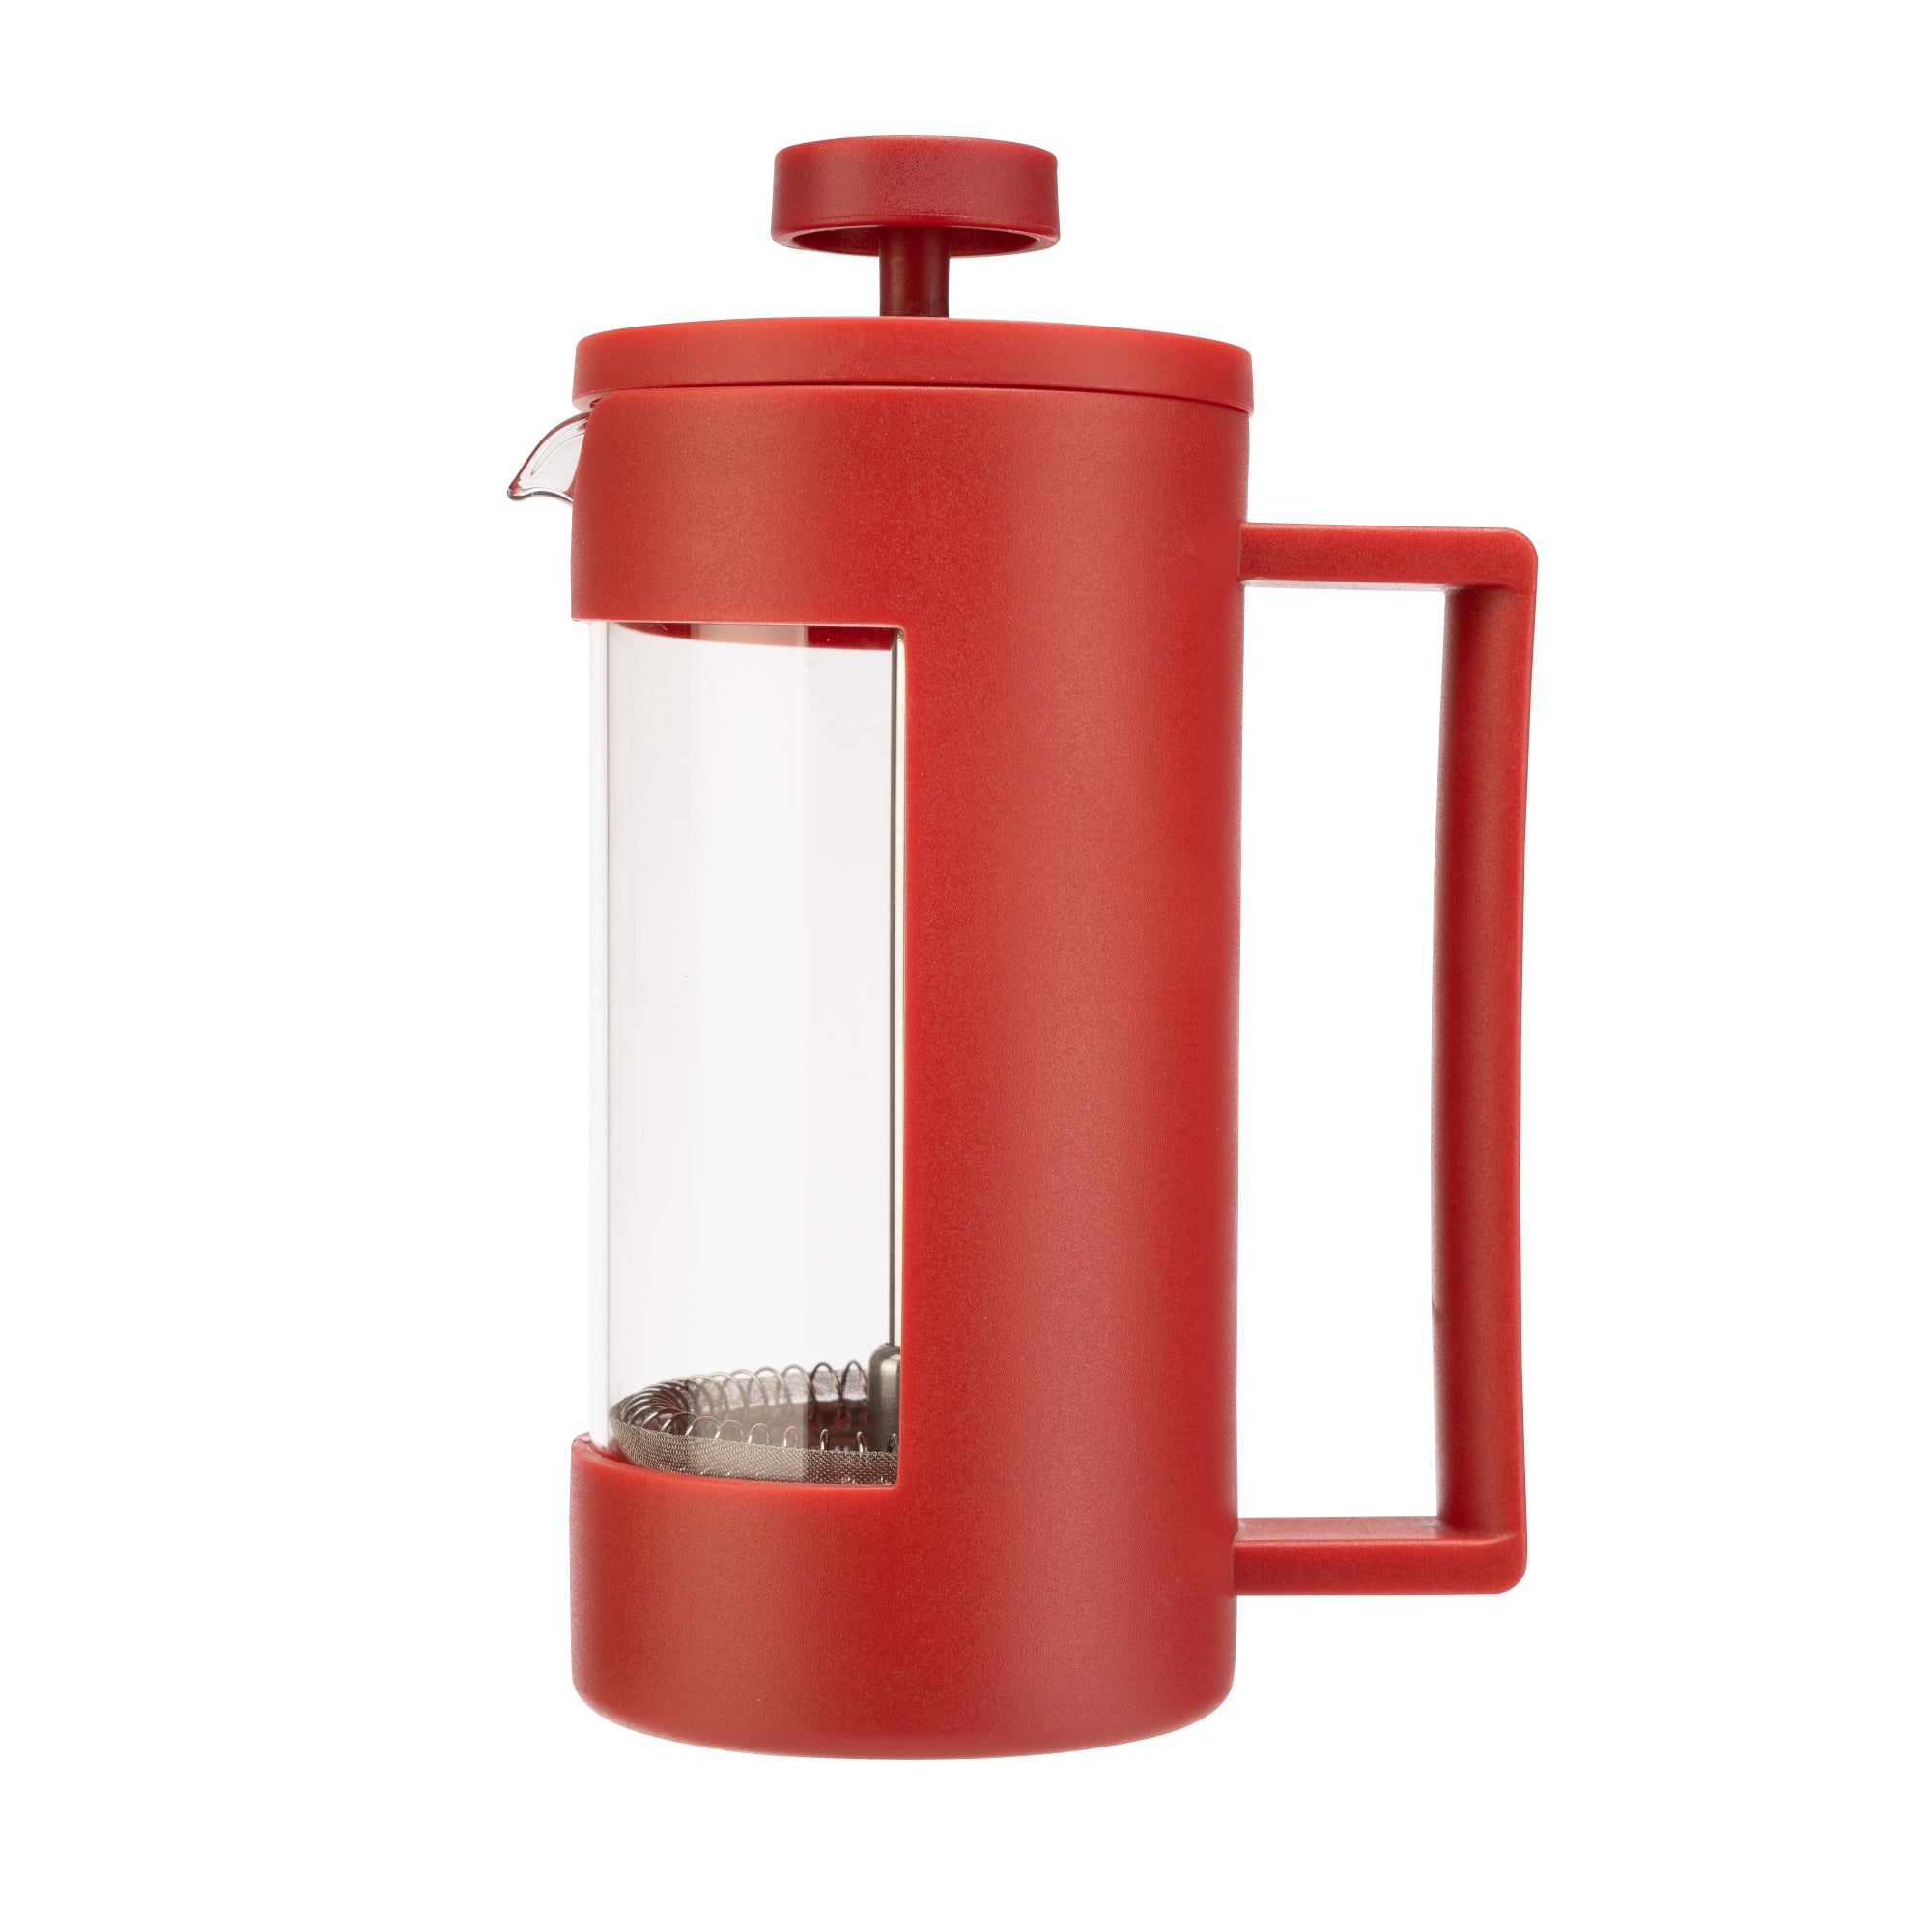 The Home Siip 3 Cup Cafetiere 2 Shaws Department Stores